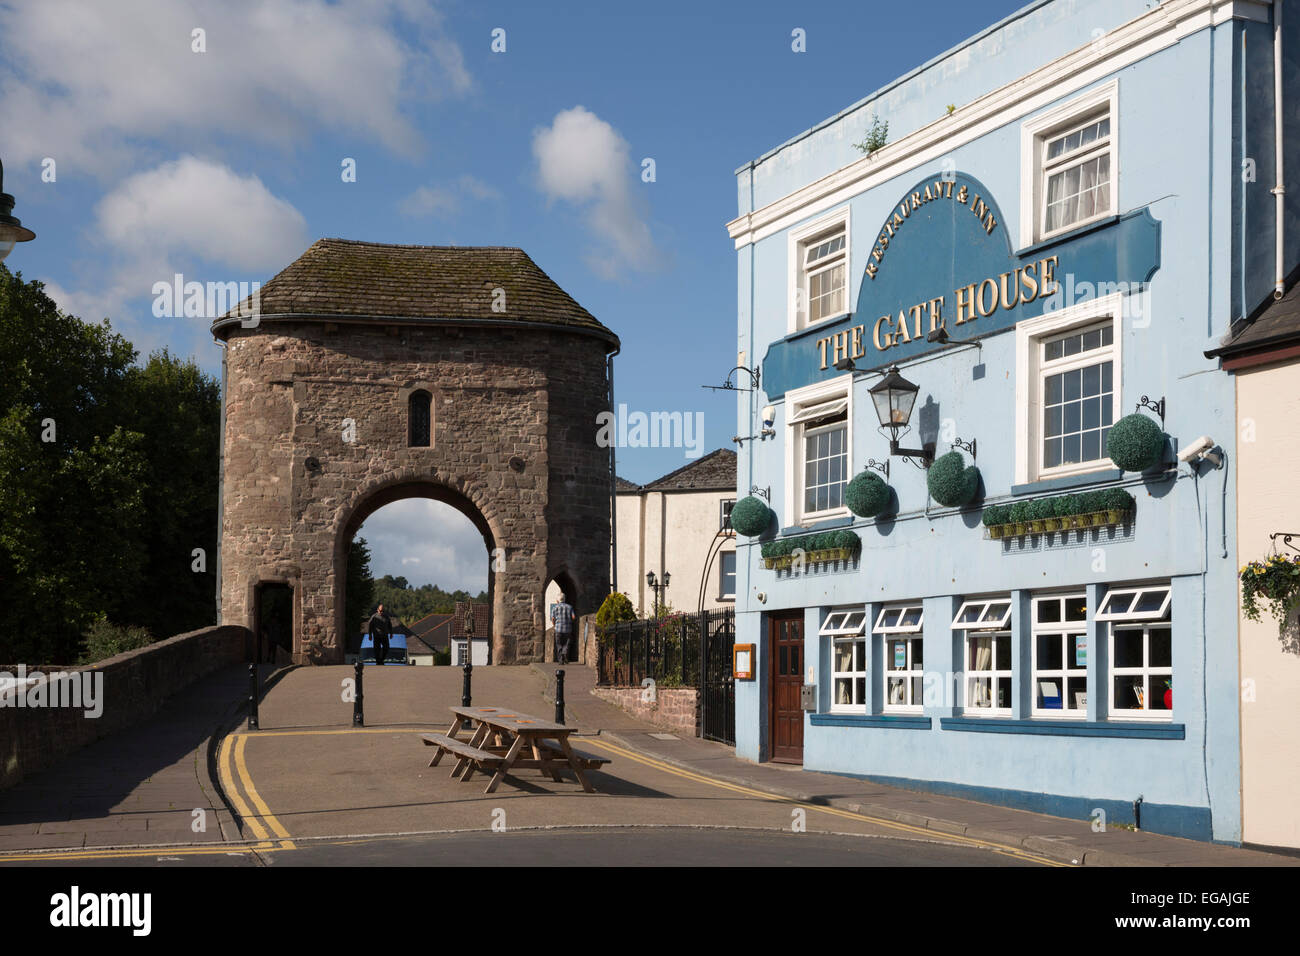 Monnow Bridge and Gate with The Gate House pub, Monmouth, Monmouthshire, Wales, United Kingdom, Europe Stock Photo